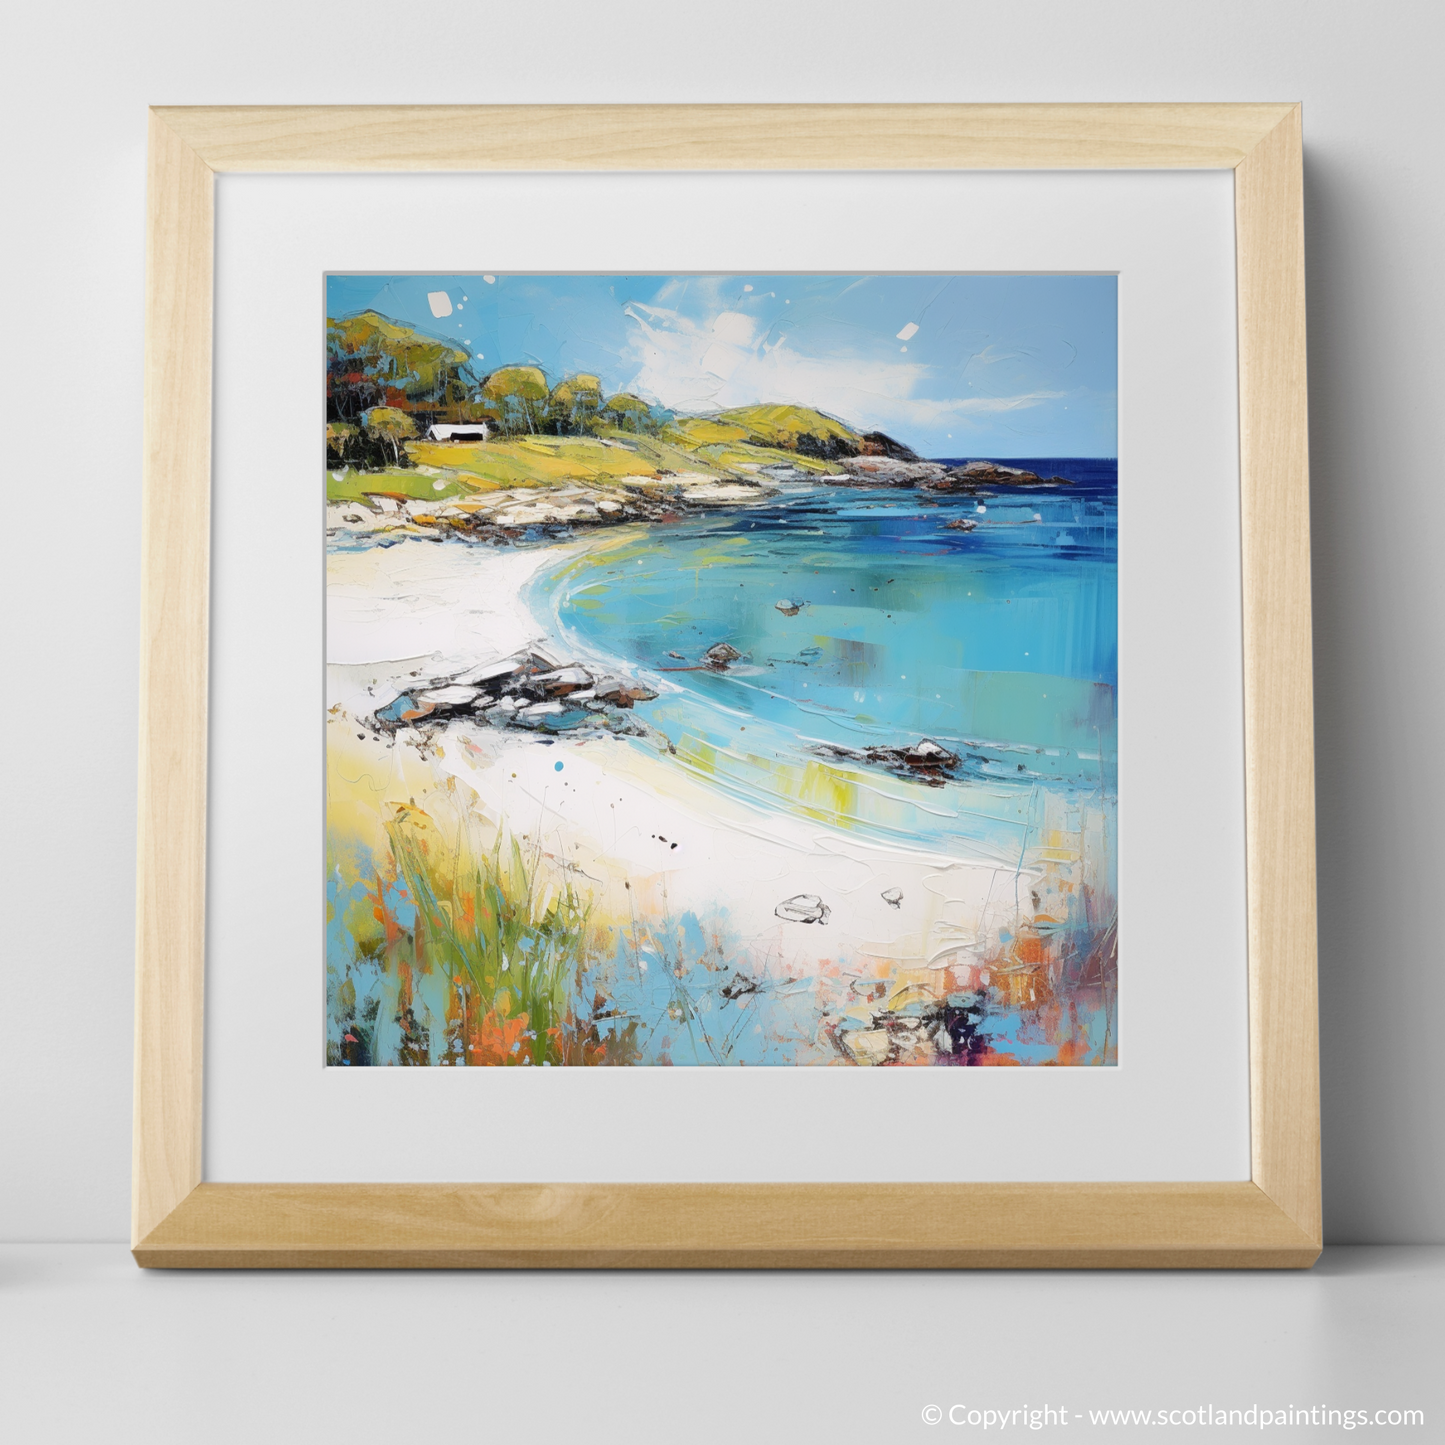 Art Print of Calgary Bay, Isle of Mull in summer with a natural frame